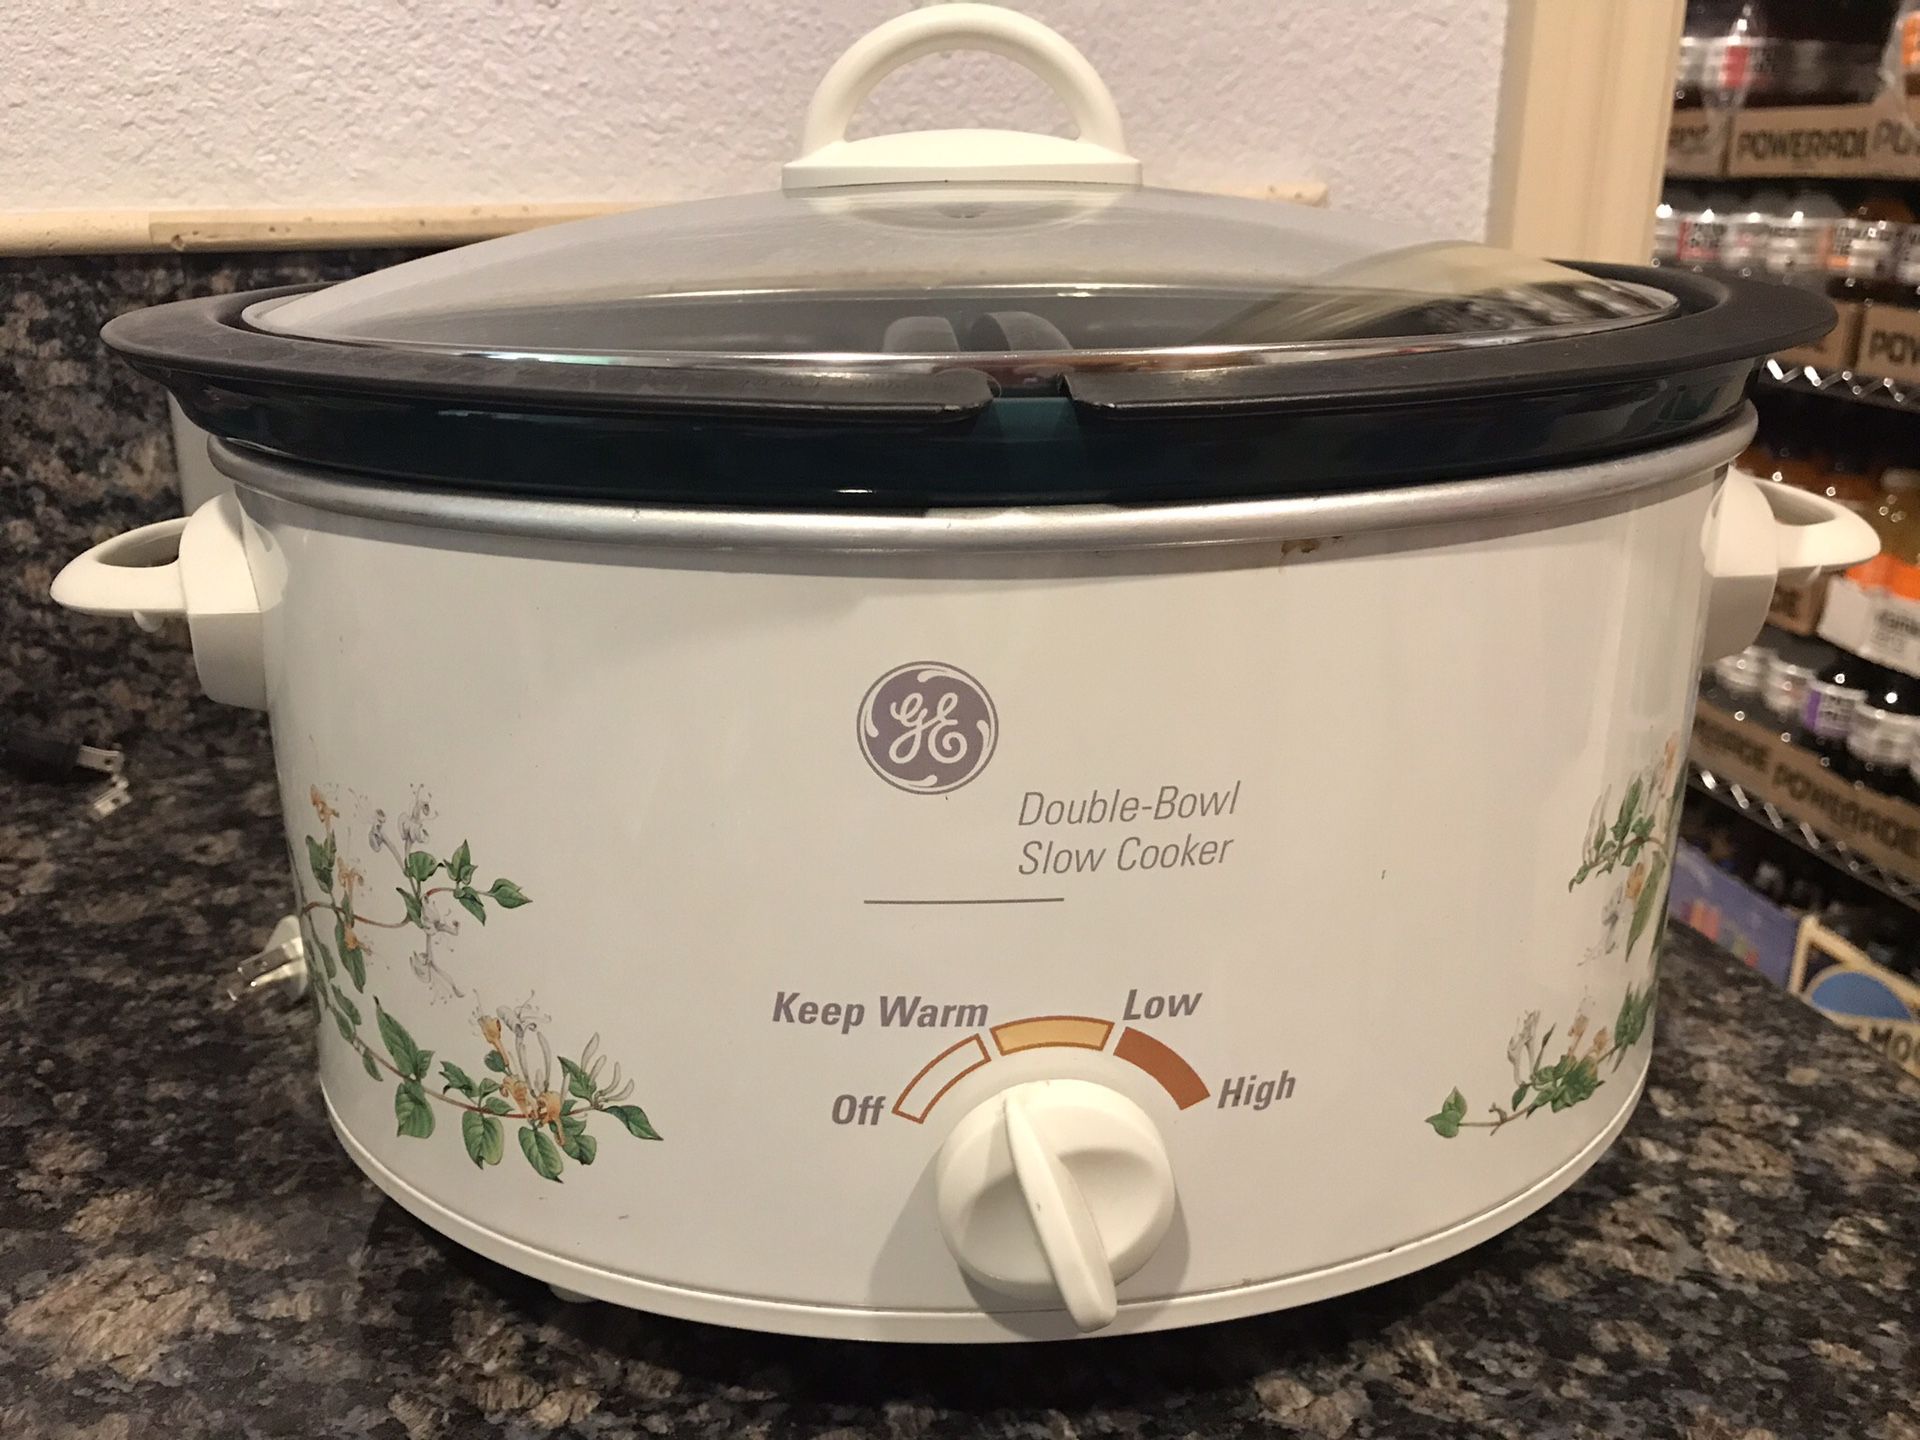 GE 6 qt Slow Cooker with removable double bowls.